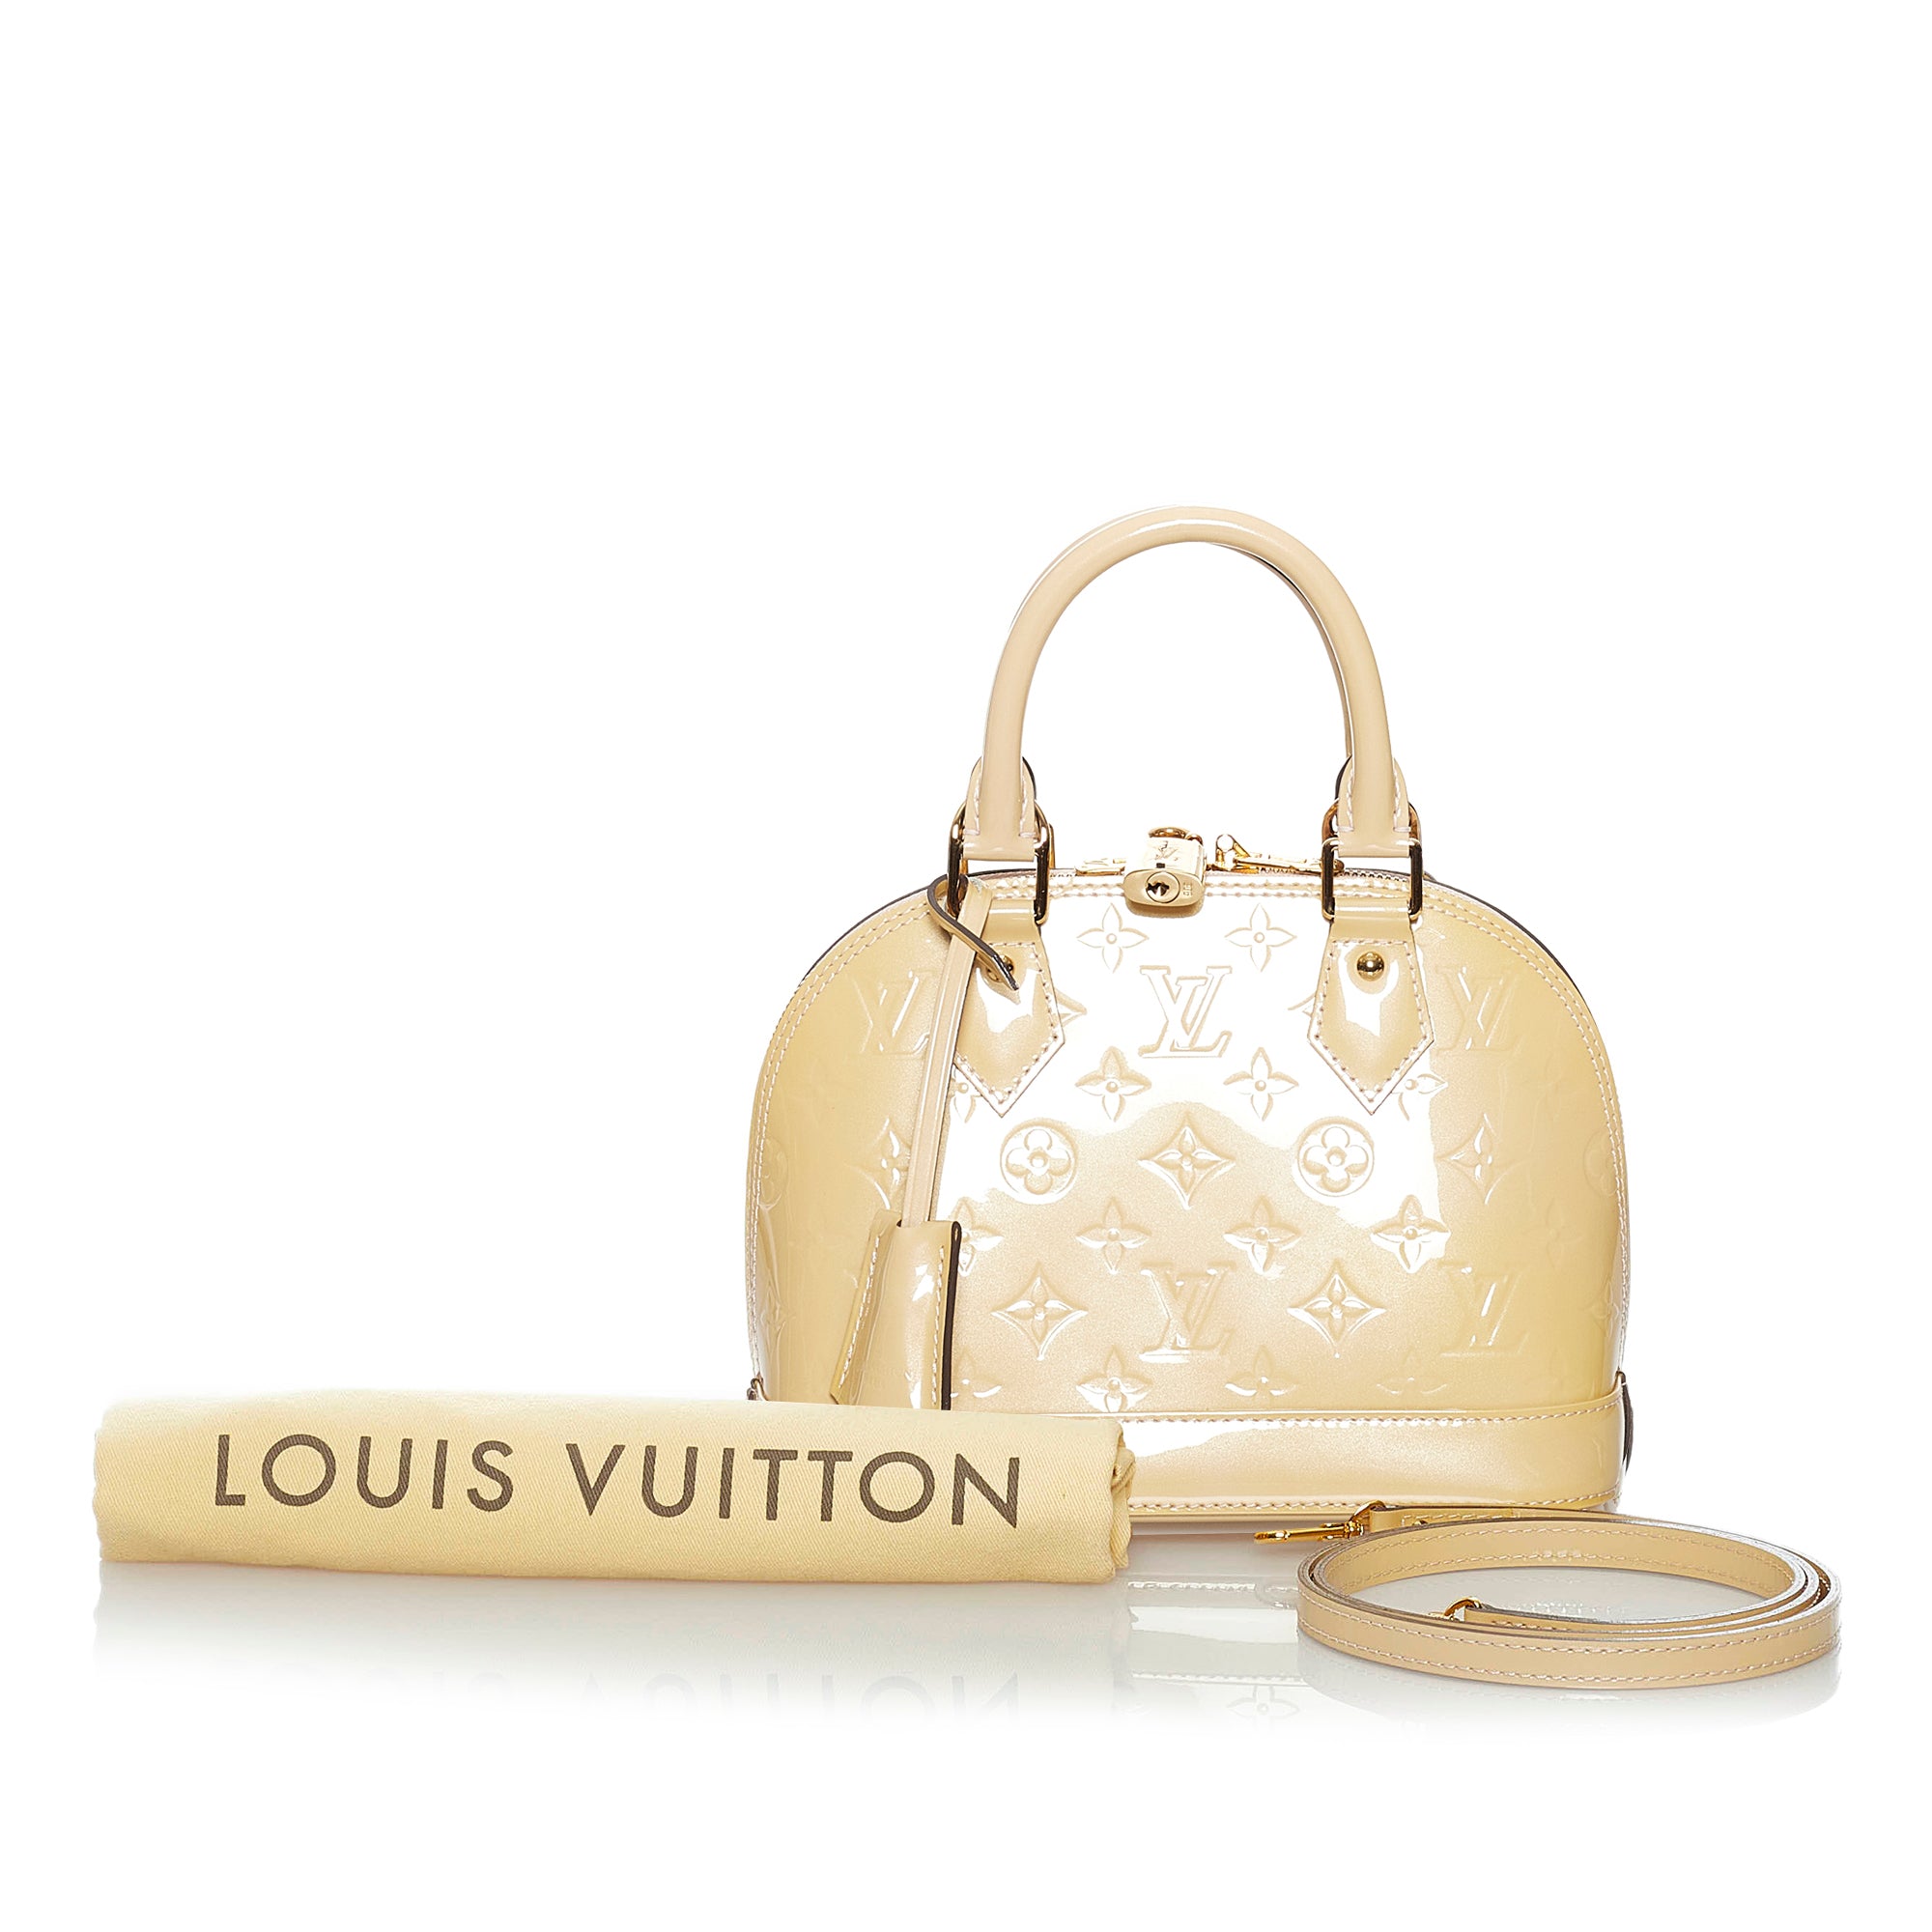 Anjel, The Artist LV Bag (2022), Available for Sale